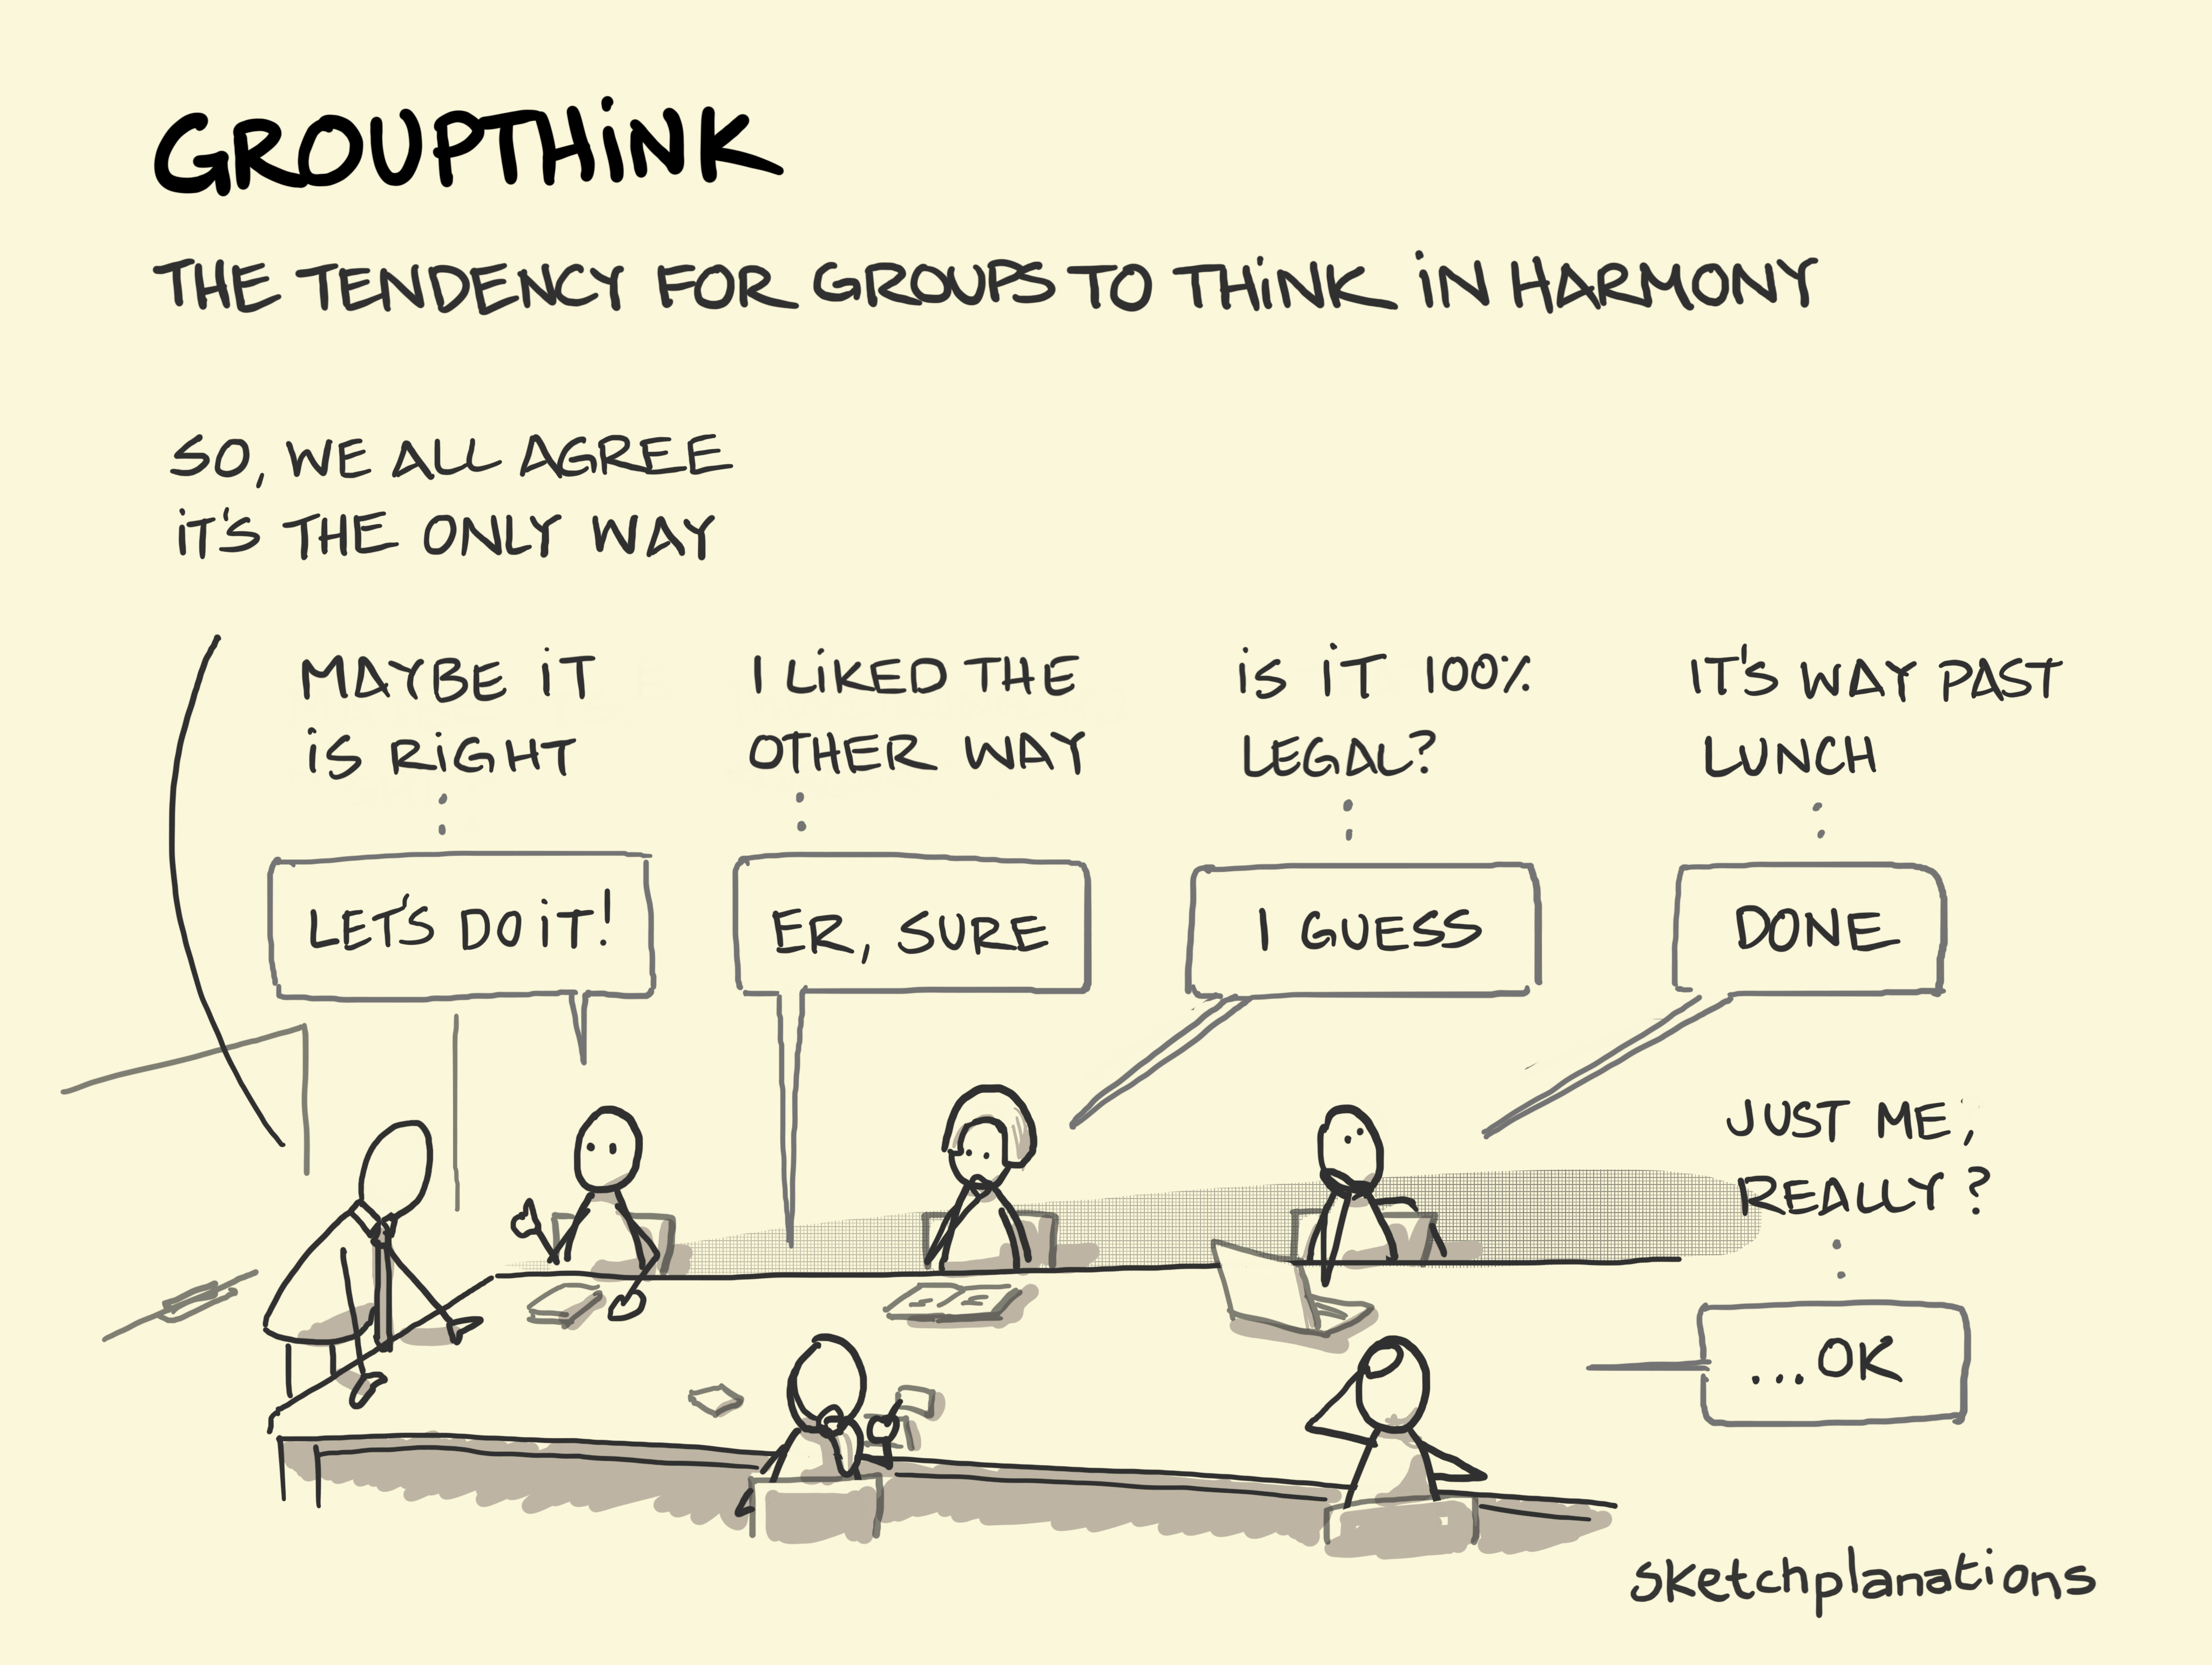 Groupthink: the tendency of groups to think in harmony